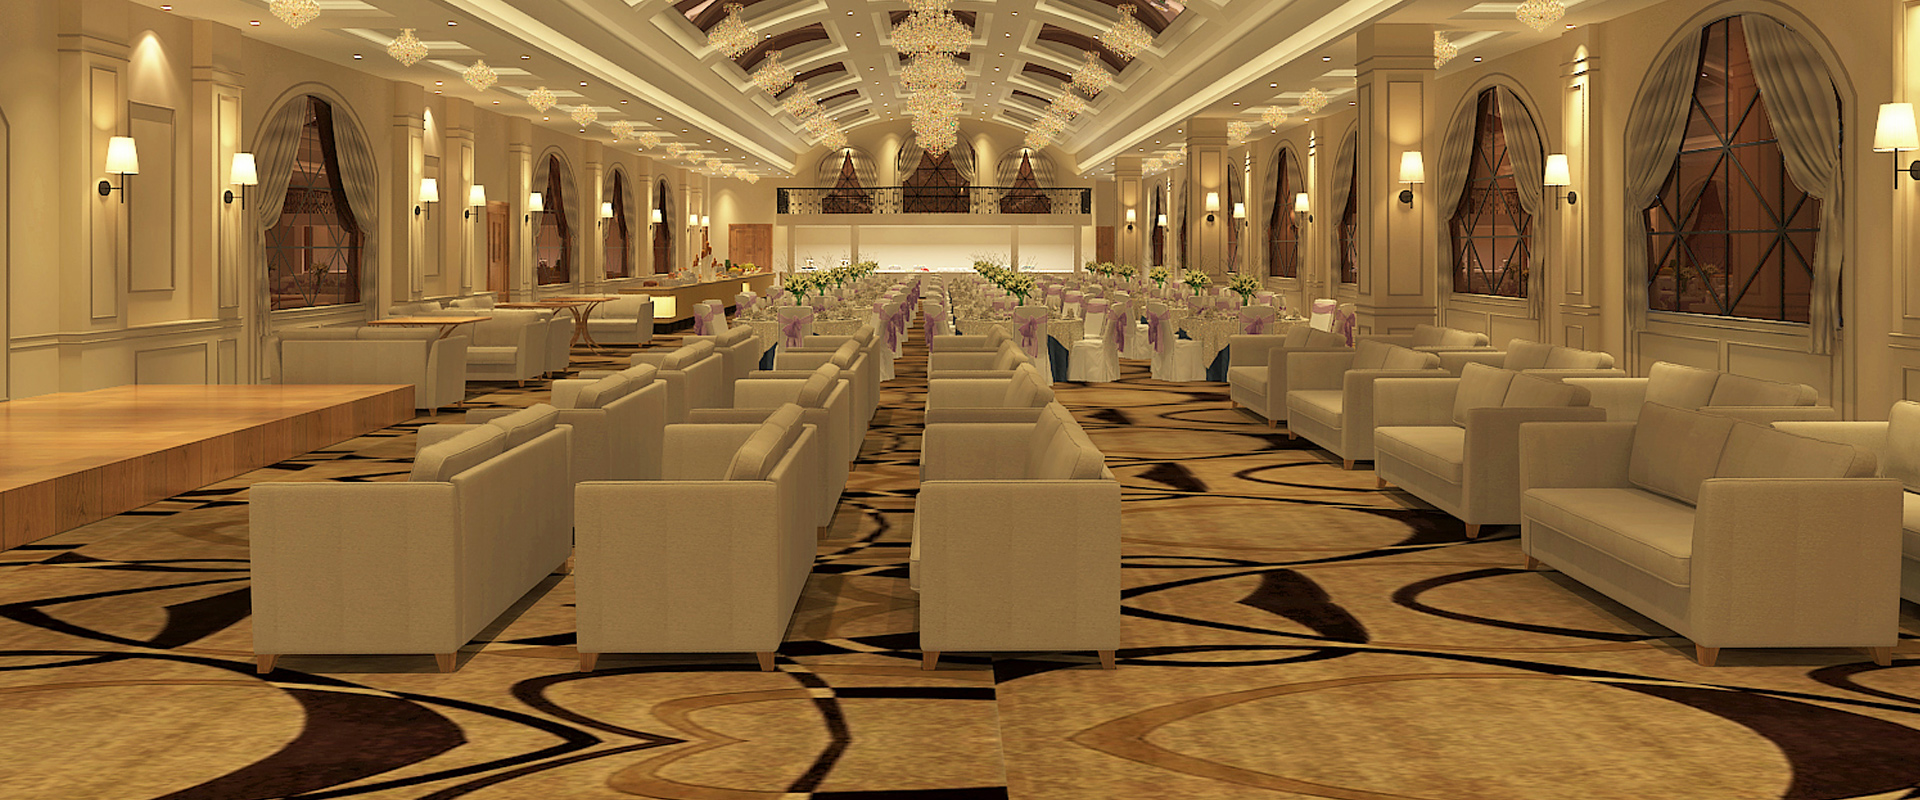 The Palace Banquet Hall